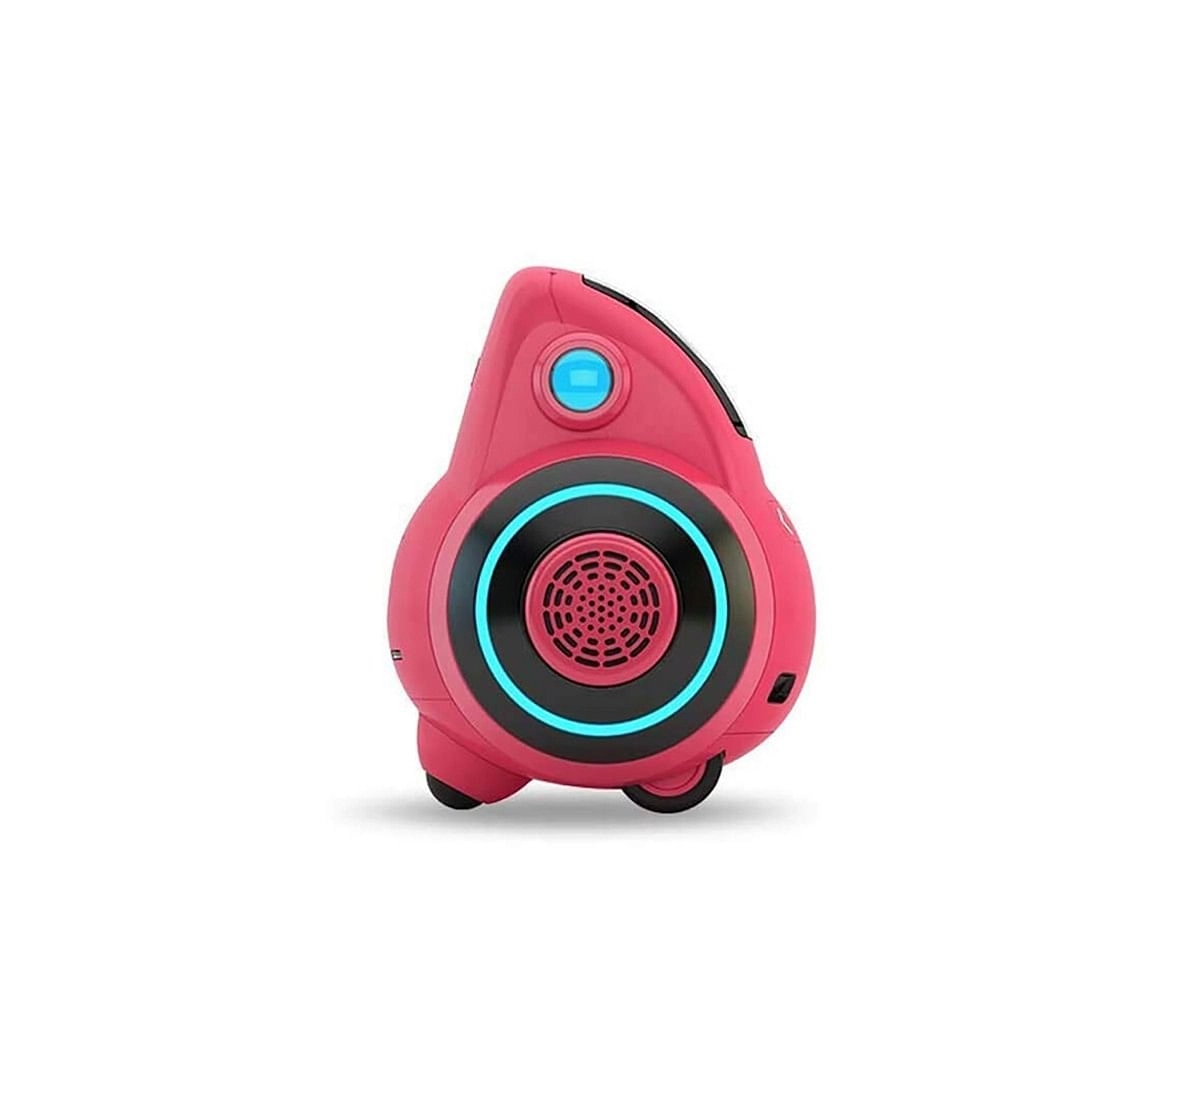 Shop Miko 2 My Companion Robot - Red Robotics for Kids age 5Y+ (Red)